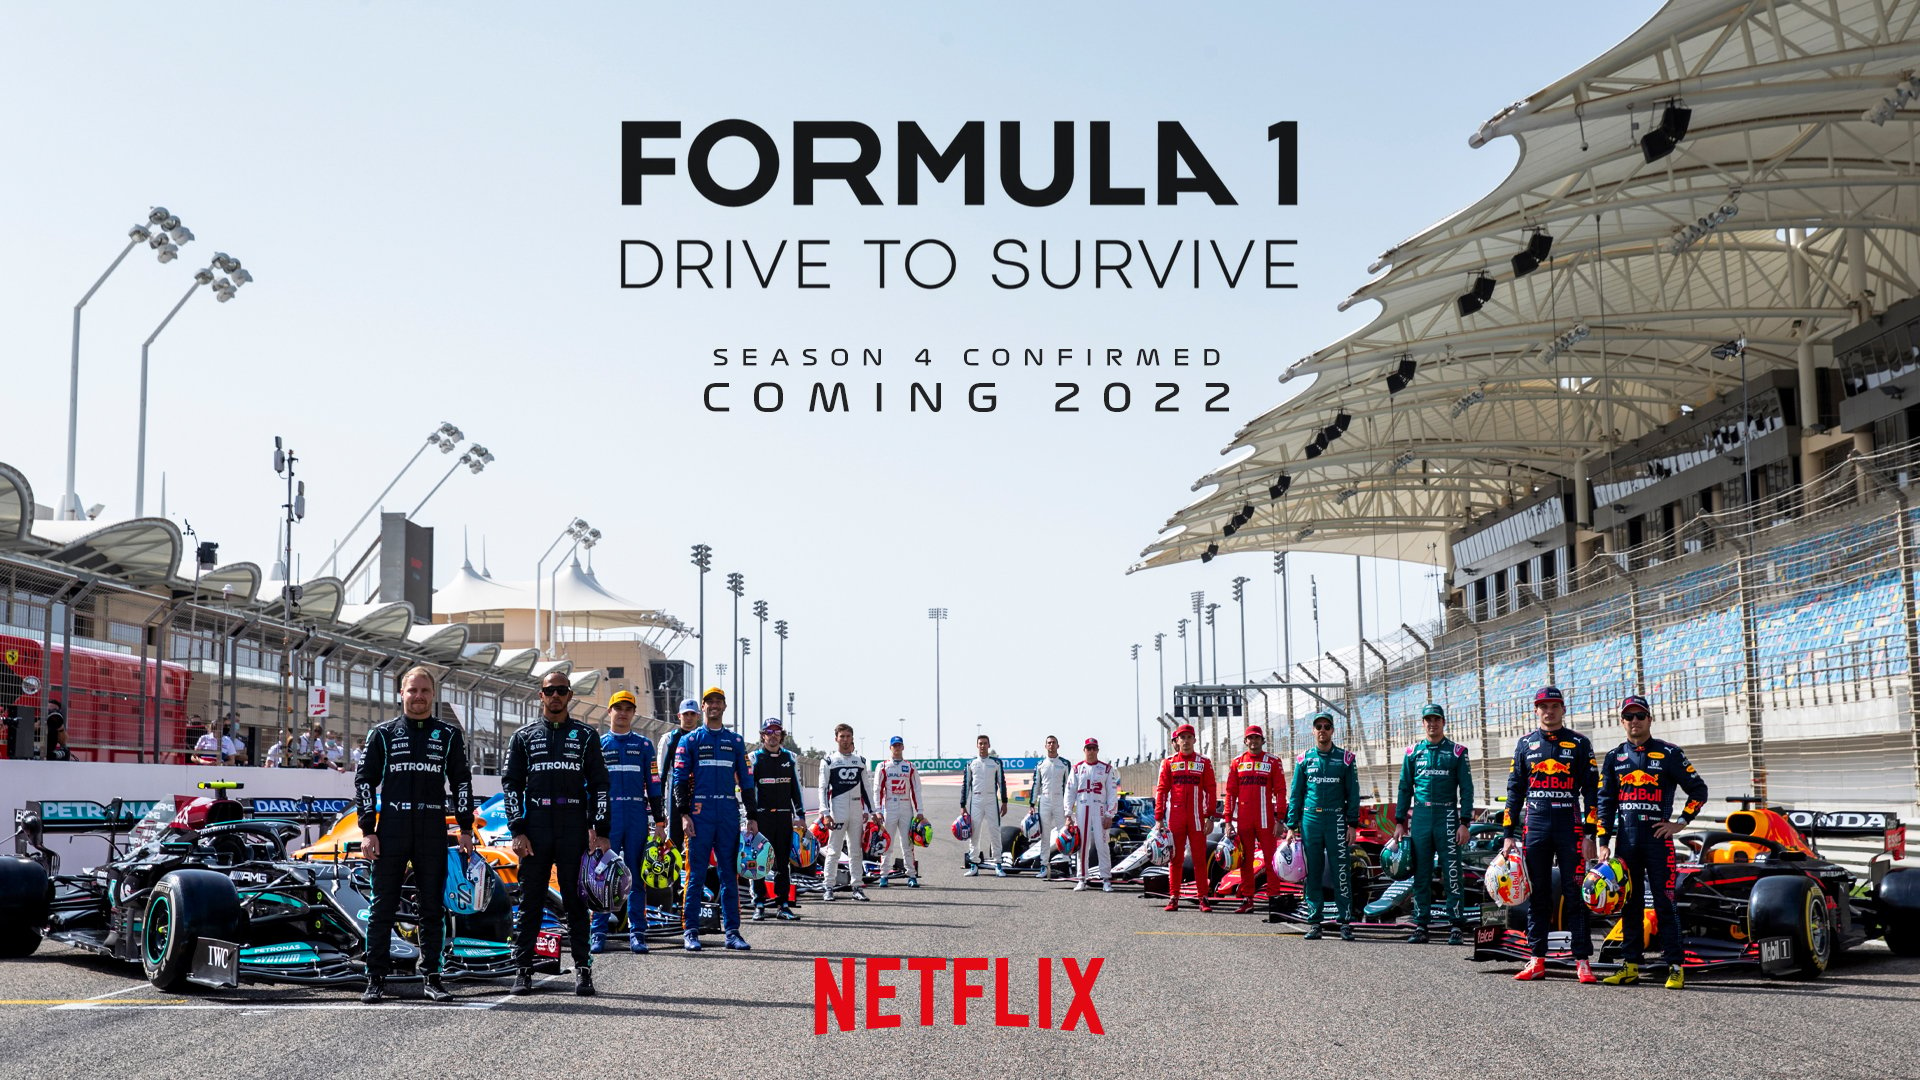 Netflixs Formula One Drive to Survive Returns for Season 4 in 2022